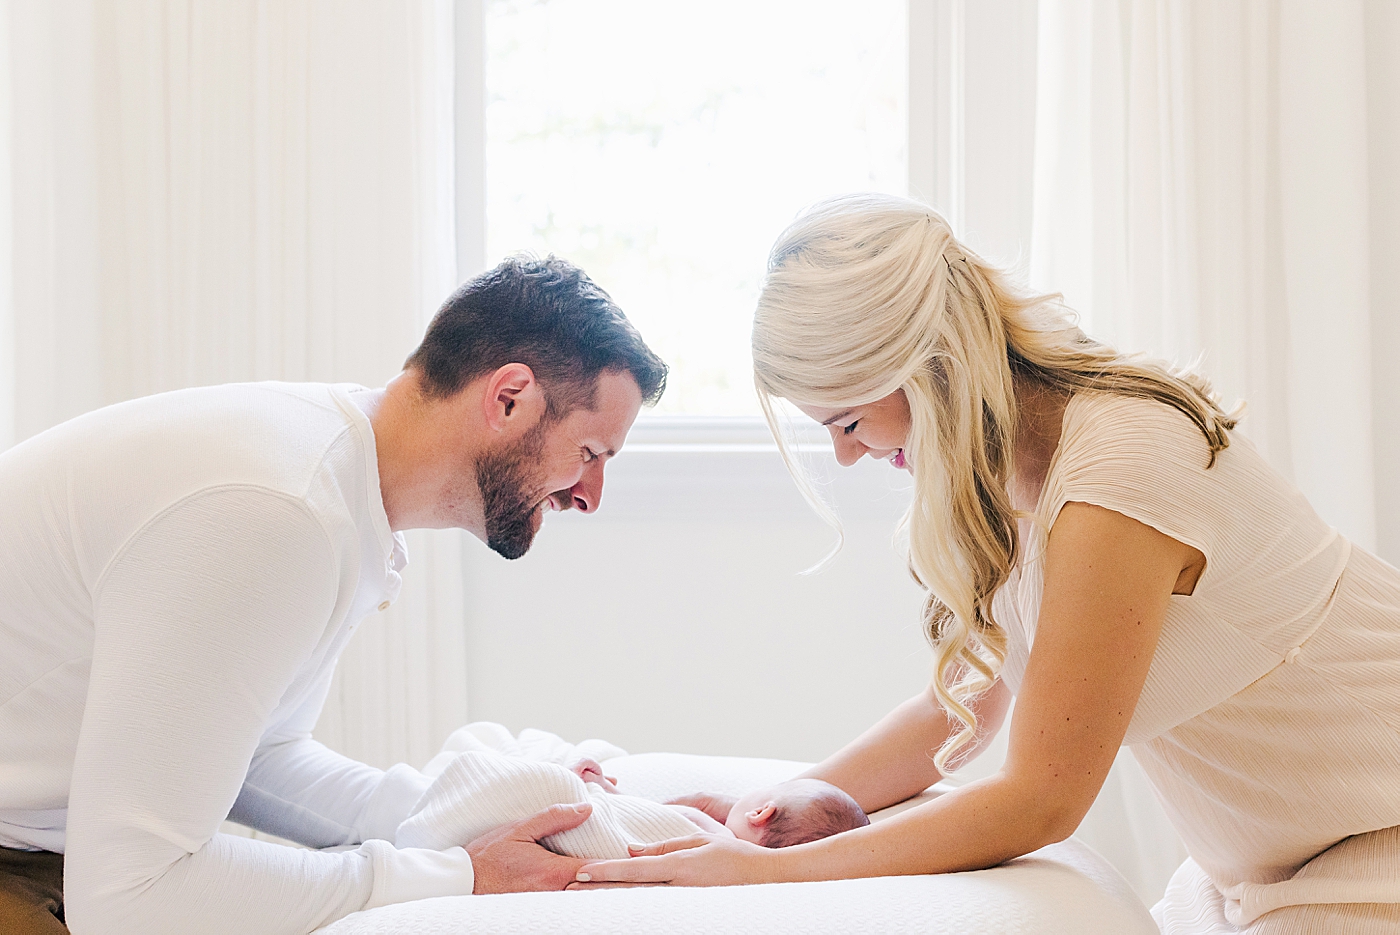 Mom and dad both holding their new baby | Photo by Ballantyne newborn photographer Anna Wisjo 